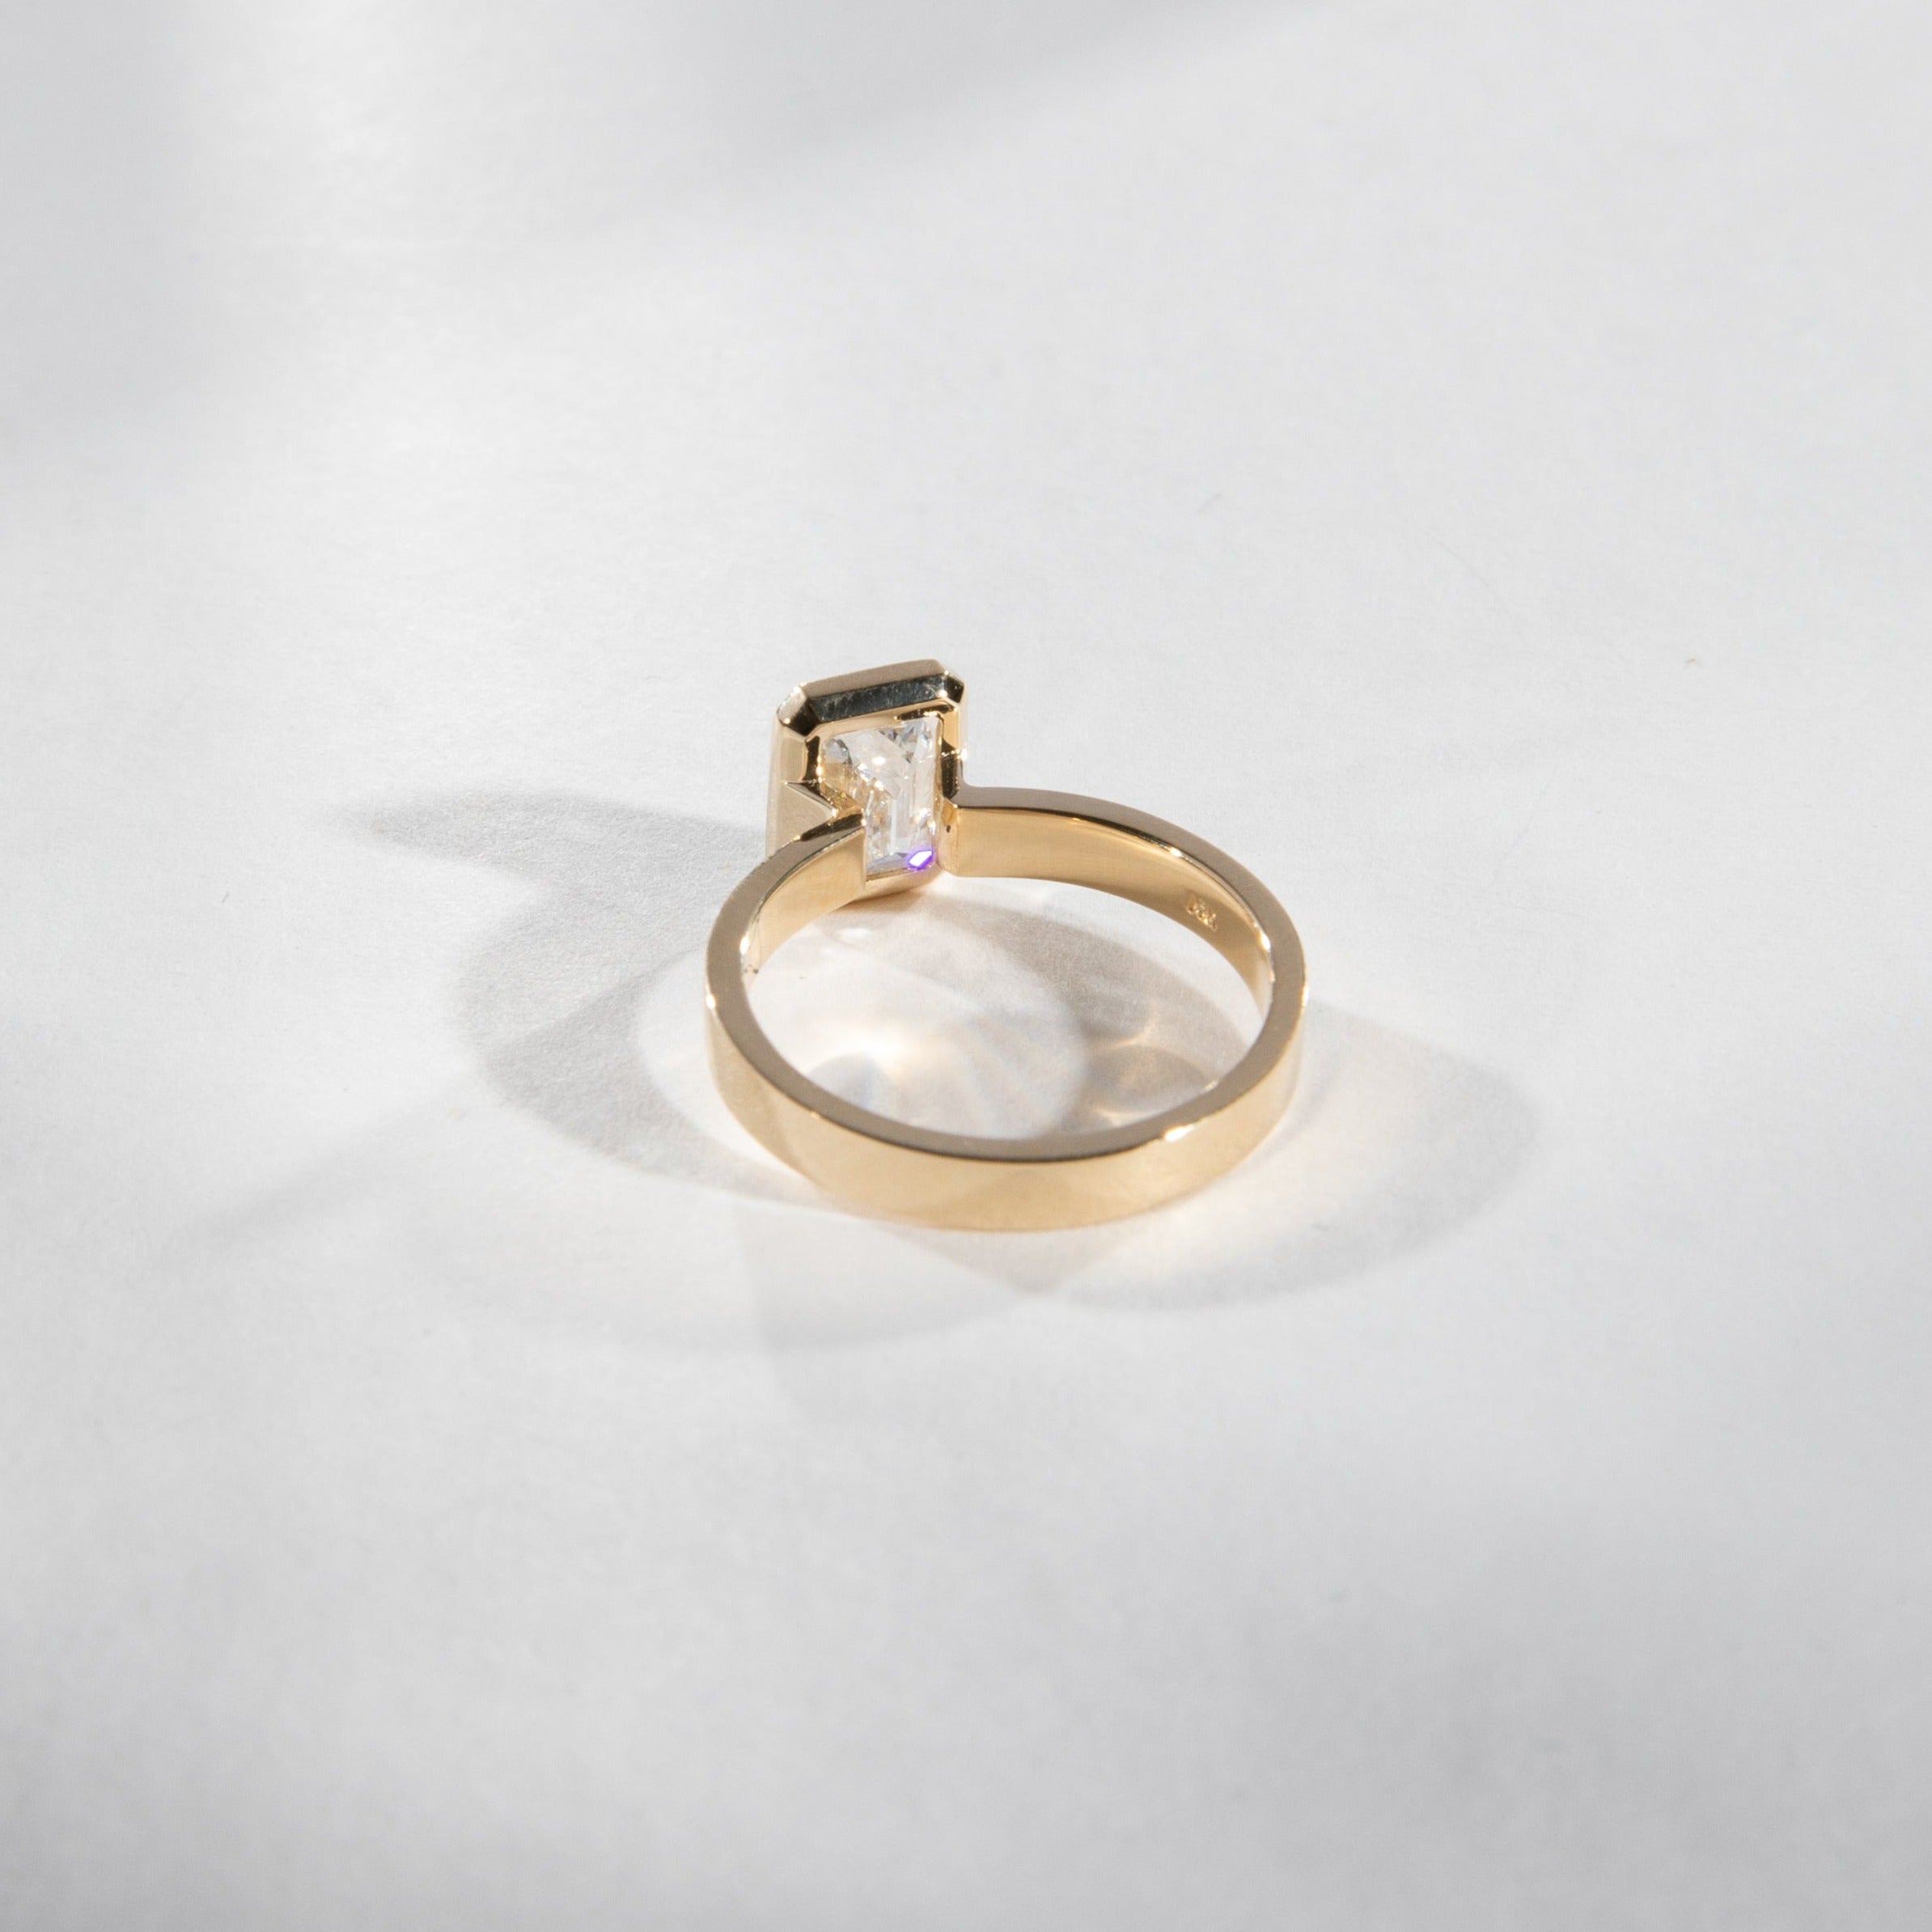 Badi Non-traditional ring in 14k Yellow Gold set with a lab-grown diamond